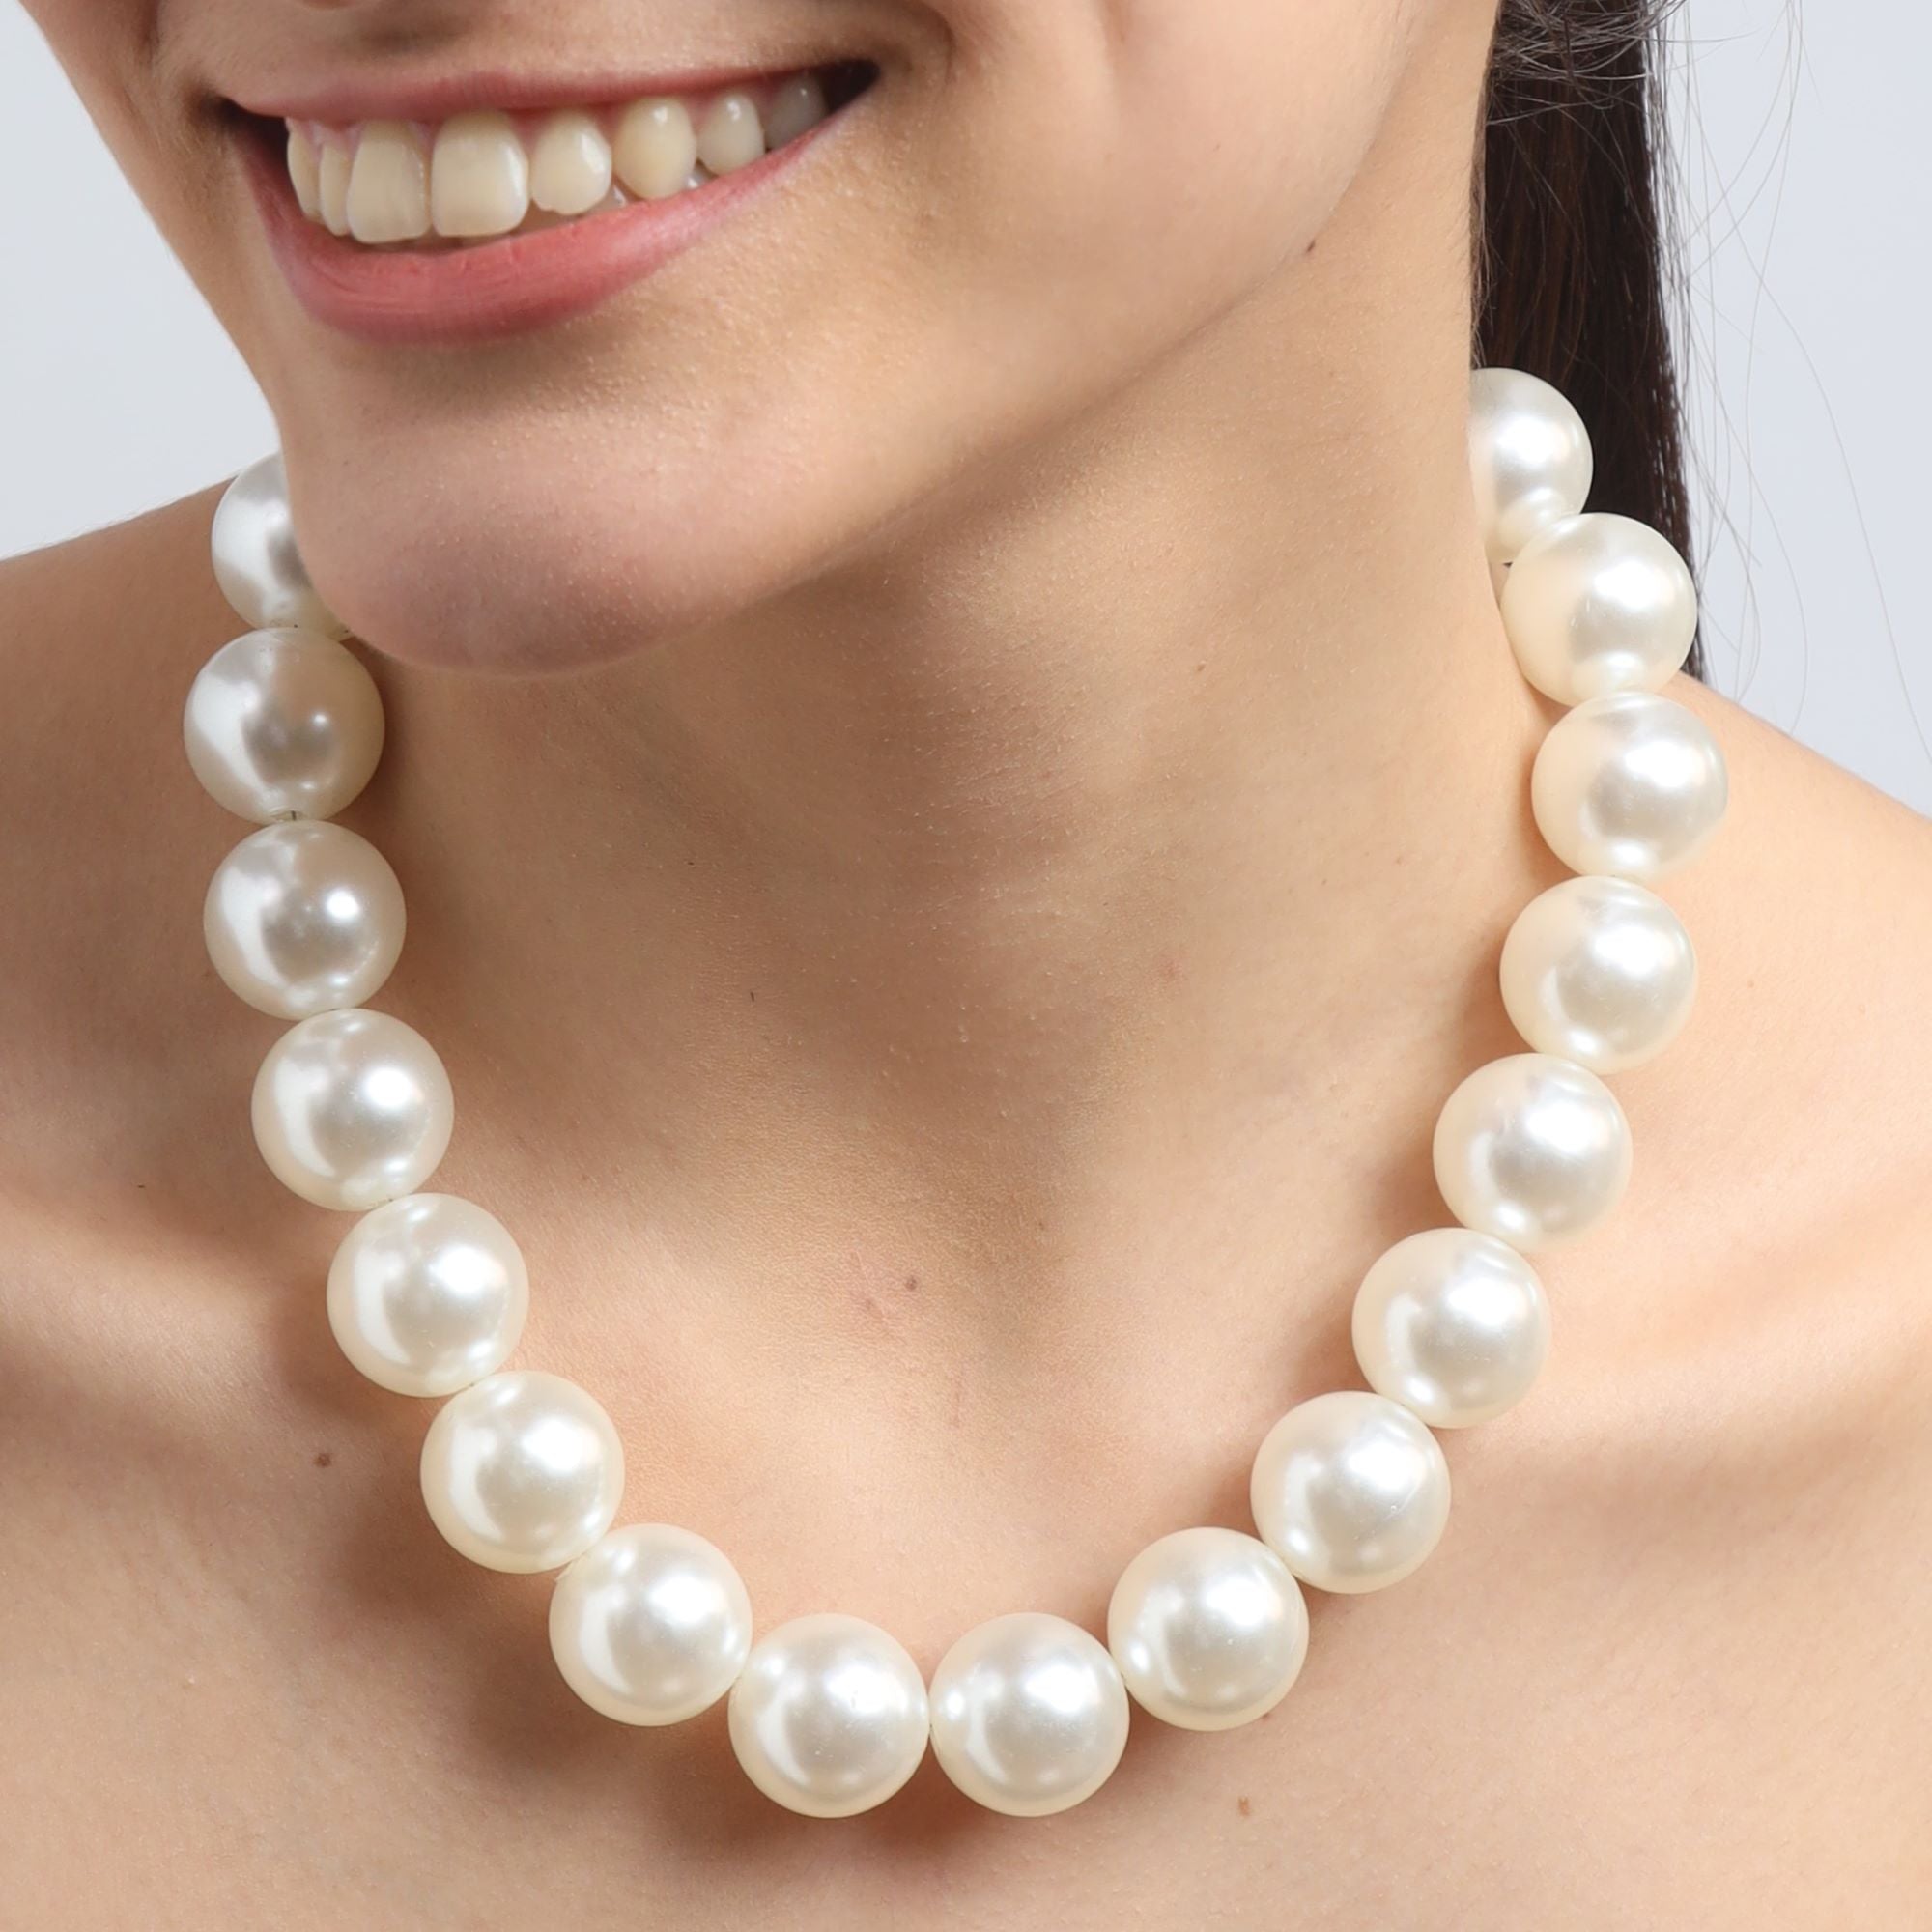 TFC Adorn Big Bold Pearl Beads Statement Necklace